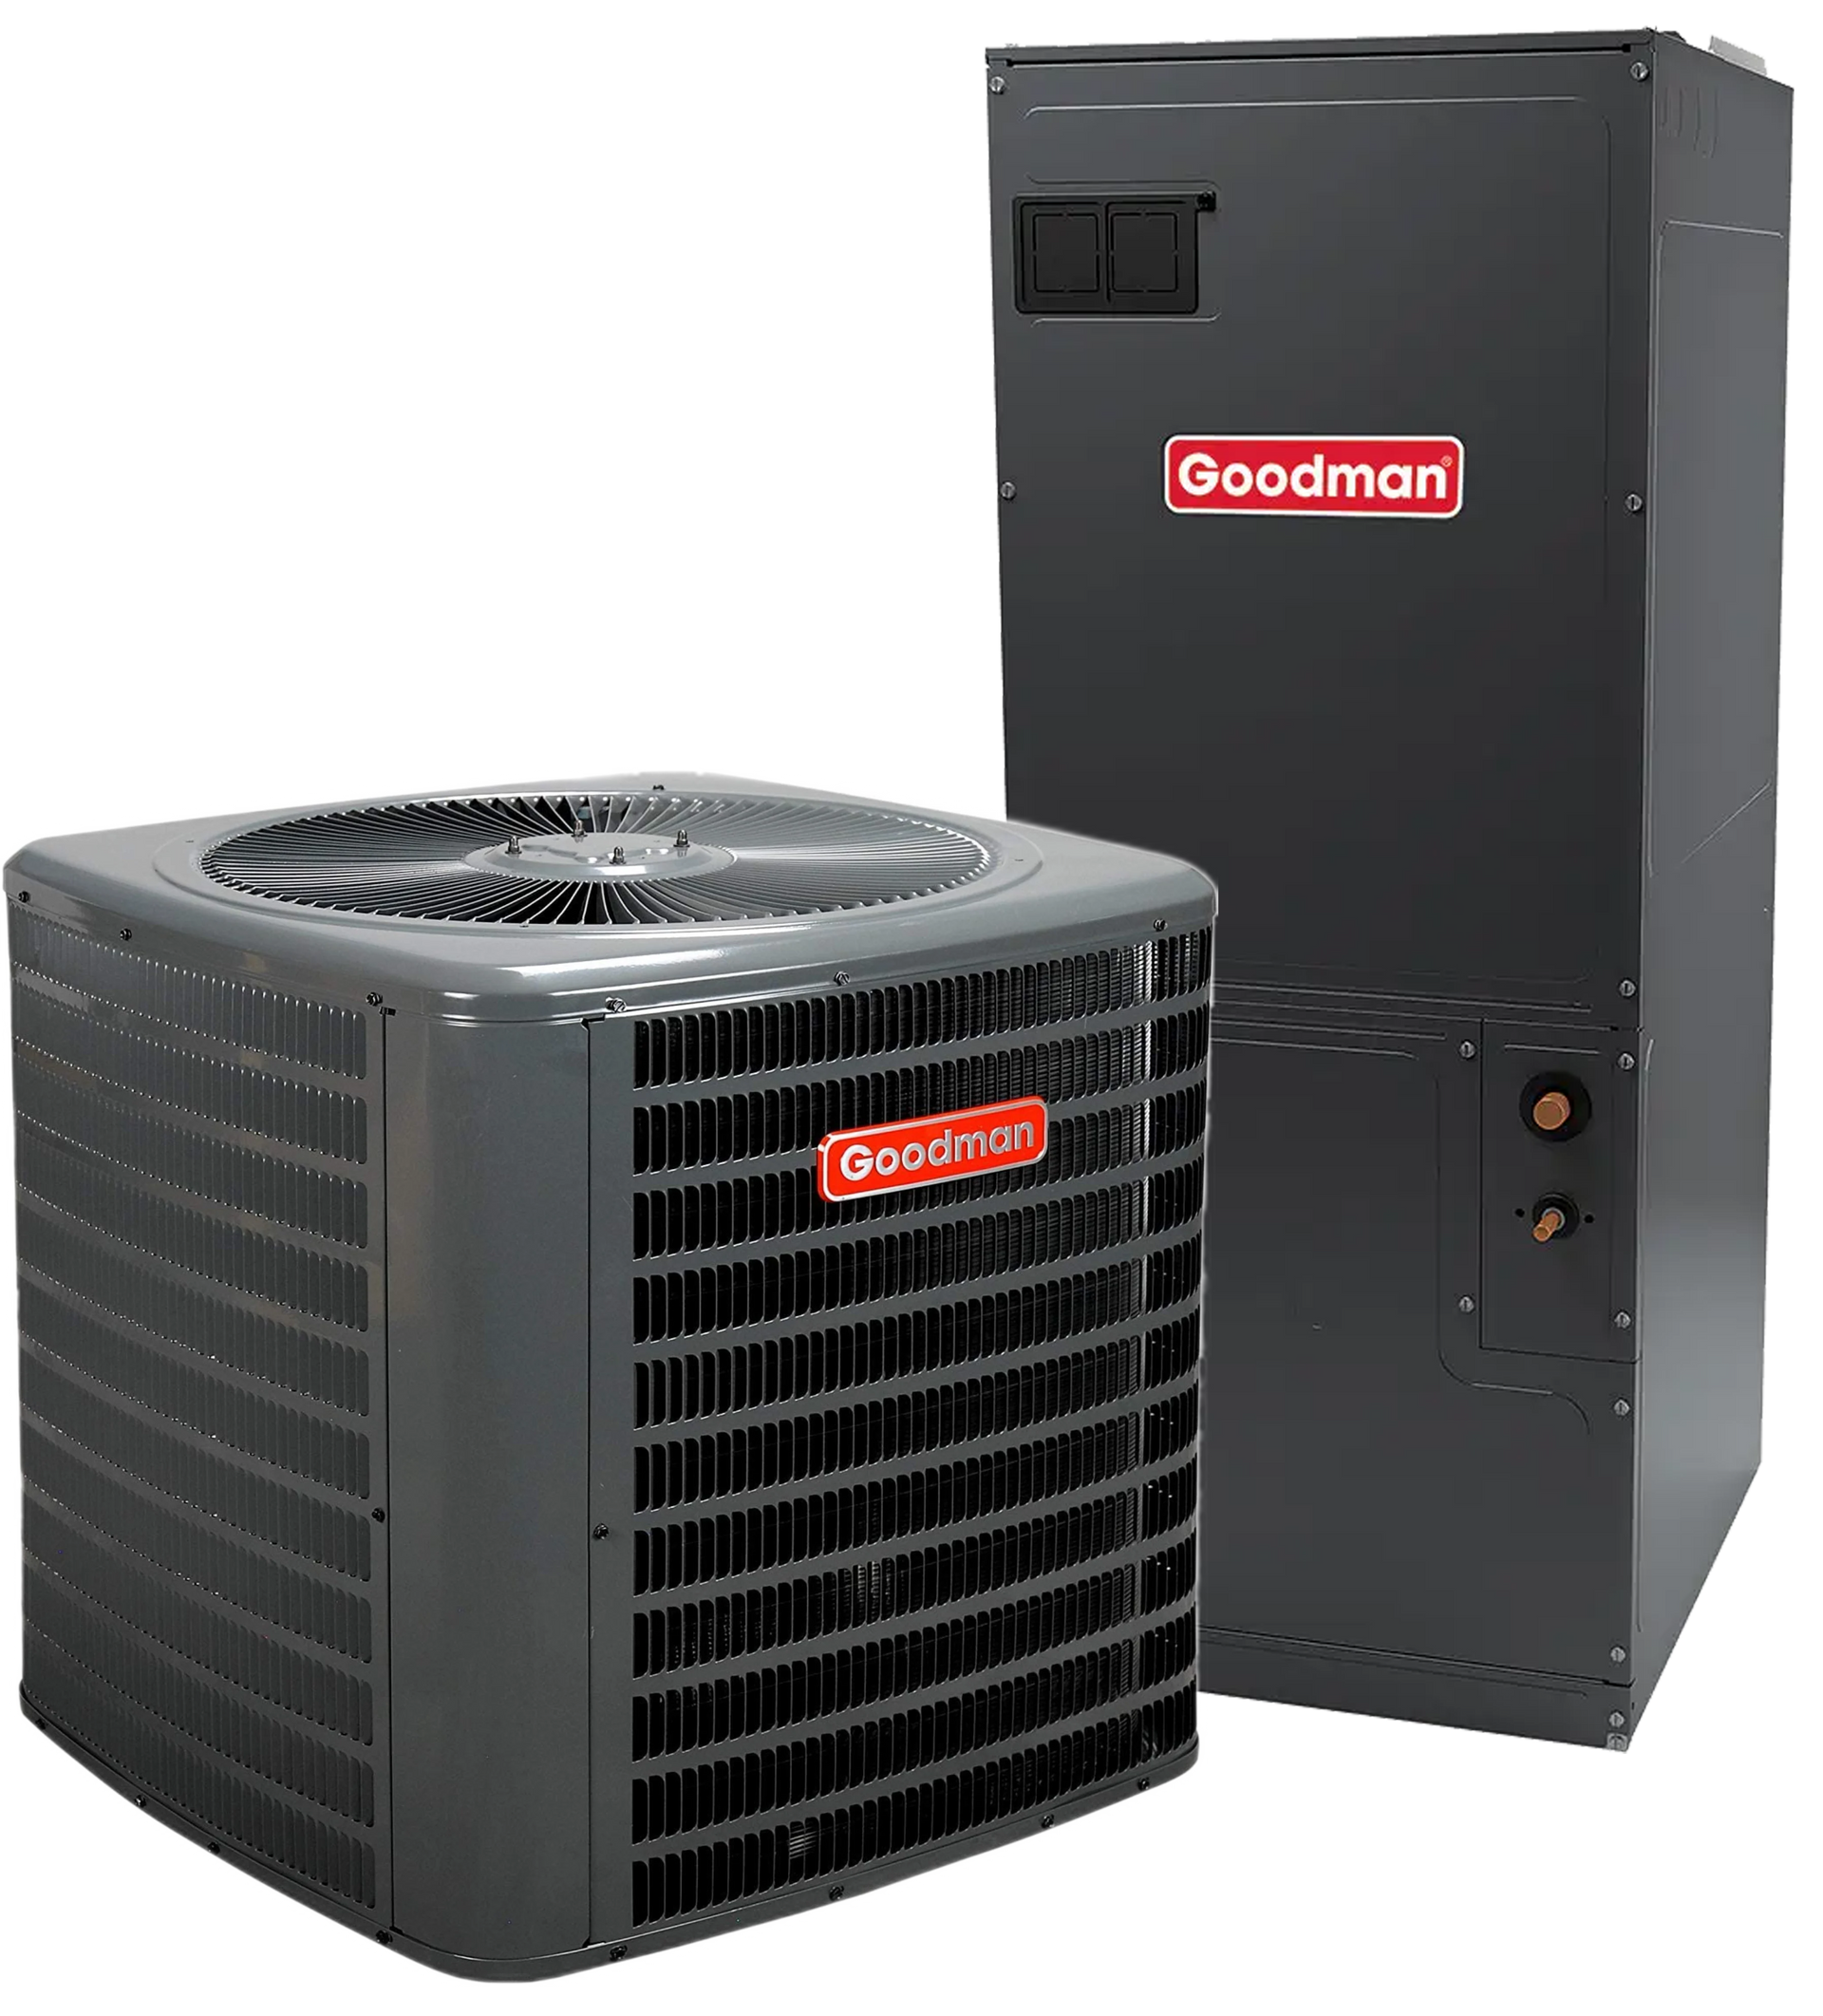 a goodman air conditioner and a goodman air conditioner on a white background .